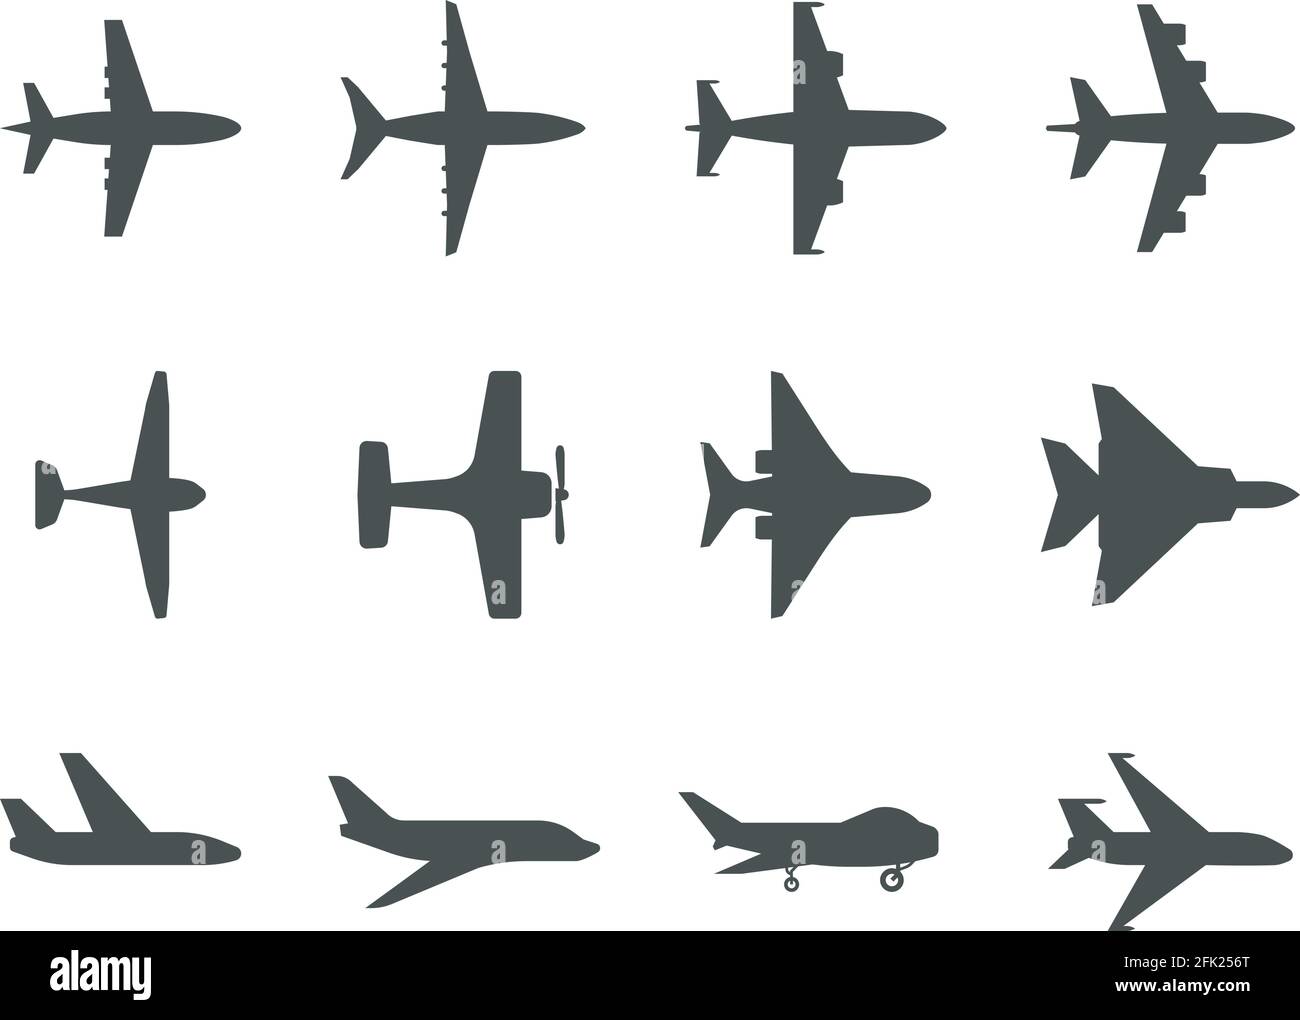 Planes symbols. Aircraft silhouettes jet aviation transportation for travel vector icons or pictograms Stock Vector